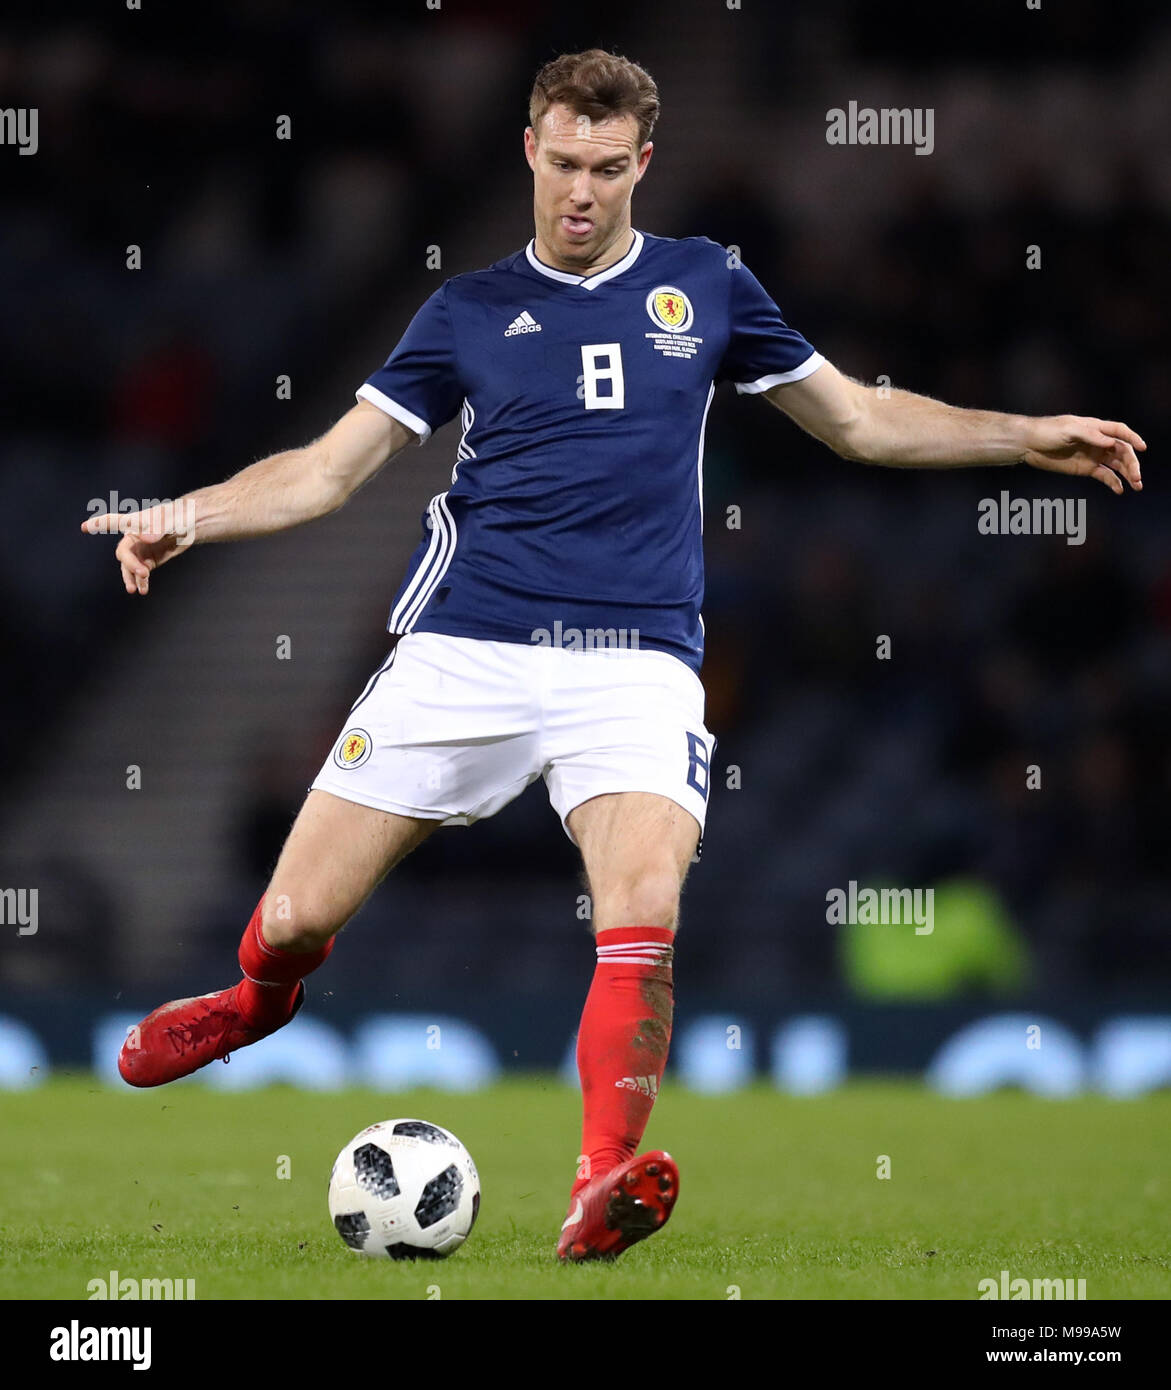 Scotland's Kevin McDonald during the international friendly match at Hampden Park, Glasgow. PRESS ASSOCIATION Photo. Picture date: Friday March 23, 2018. See PA story SOCCER Scotland. Photo credit should read: Jane Barlow/PA Wire. Stock Photo